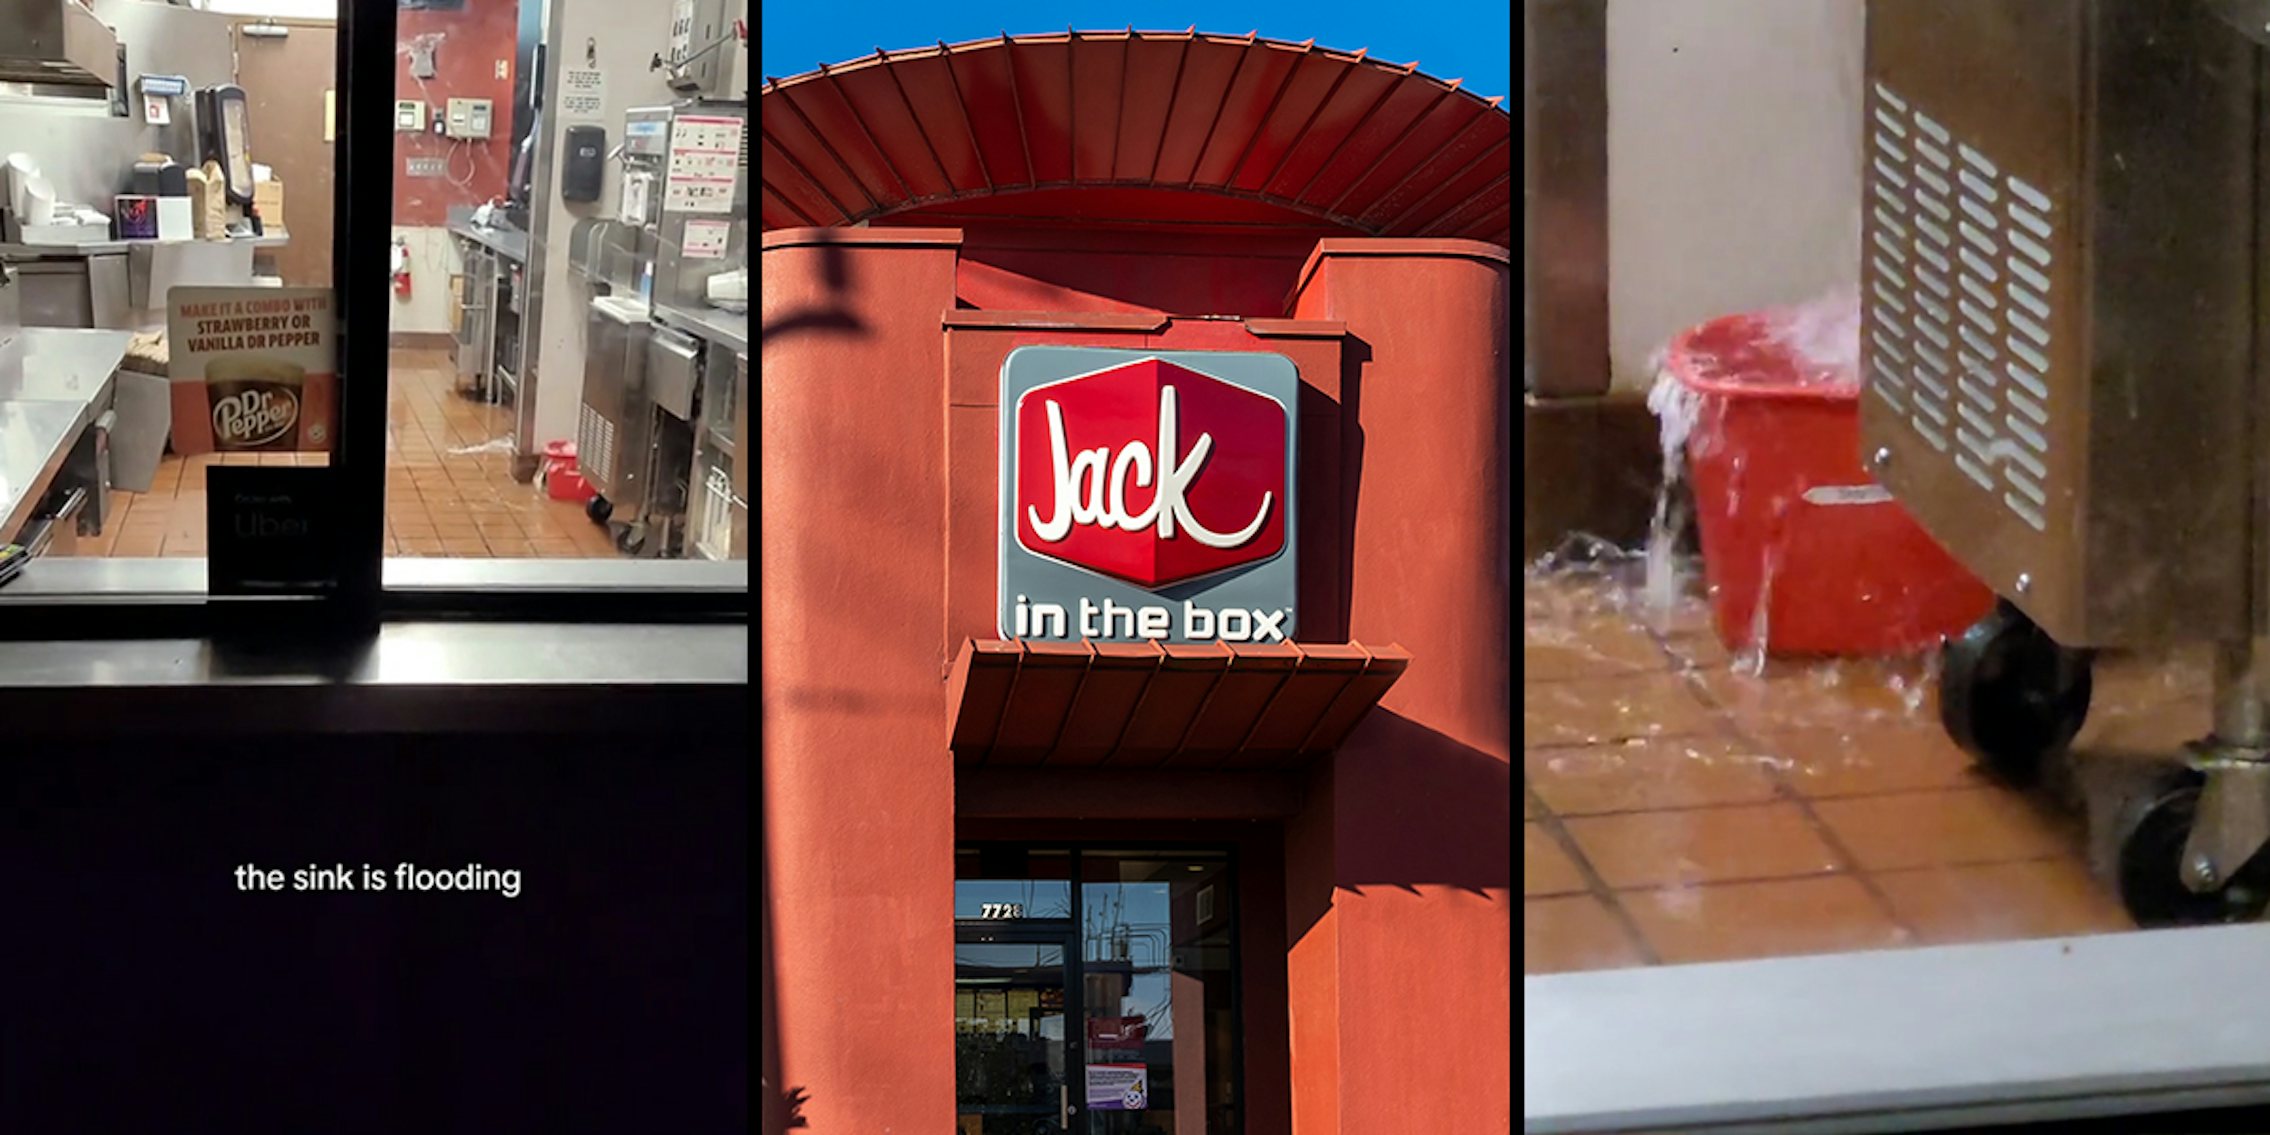 Does Jack in the Box Require a Drive-Thru?